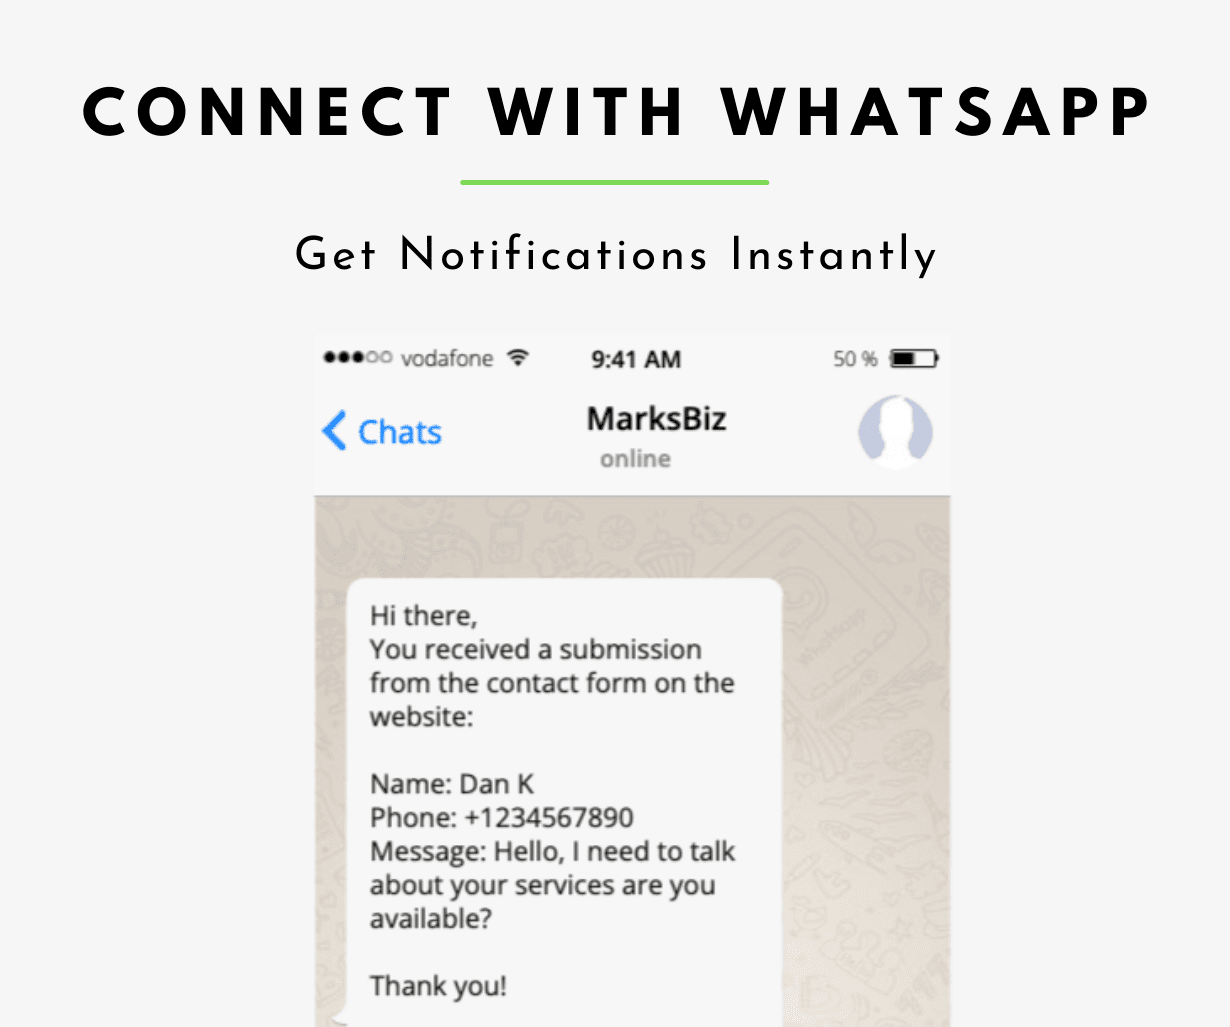 Connect Contact Form 7 with WhatsApp via Twilio - 1